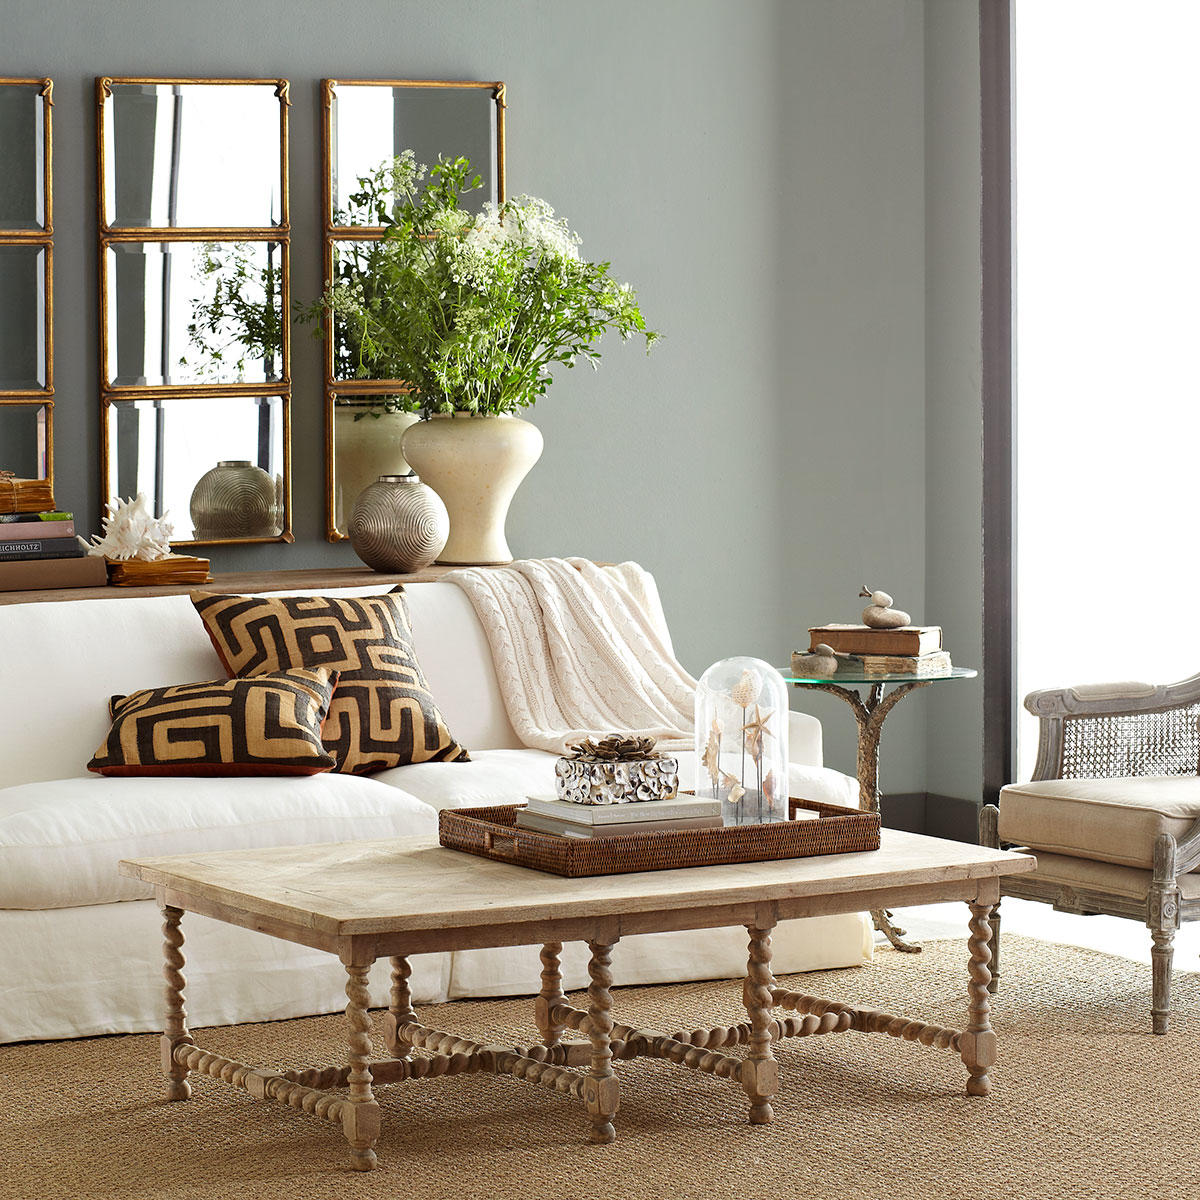 The Barley Twist coffee table from Wisteria